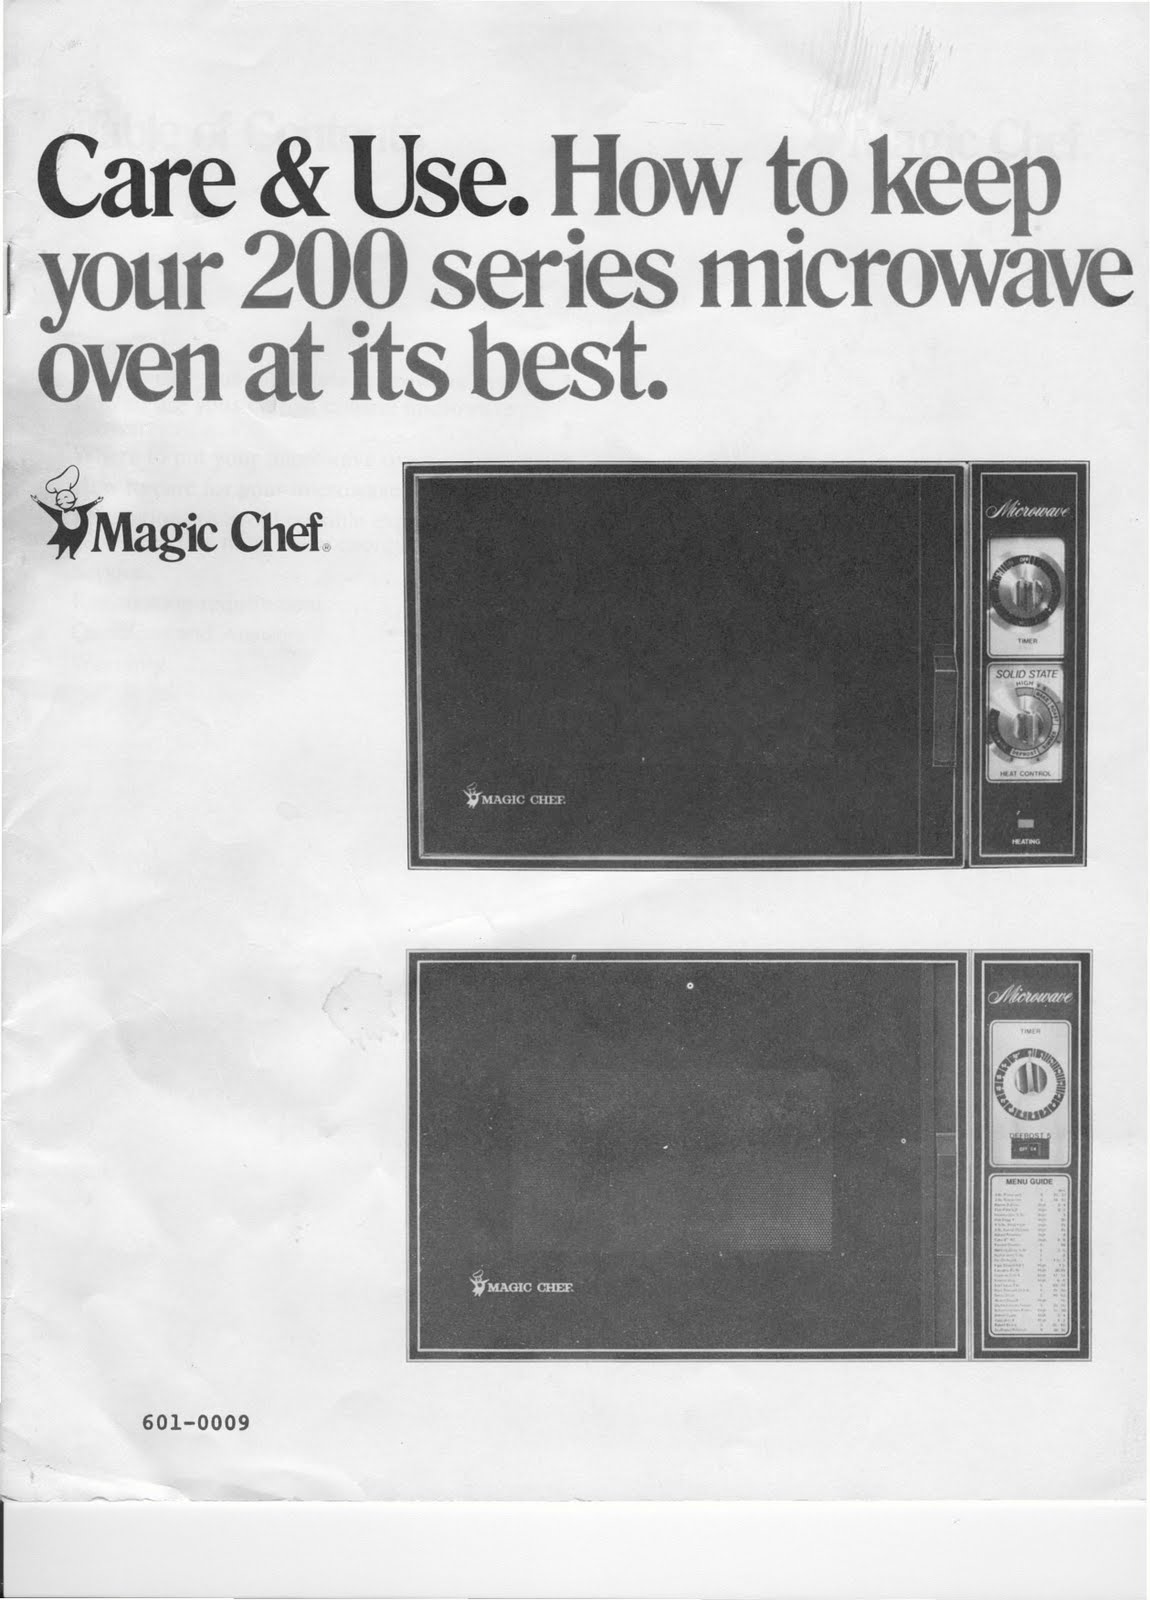 1983 Fleetwood Pace Arrow Owners Manuals: Magic Chef 200 series